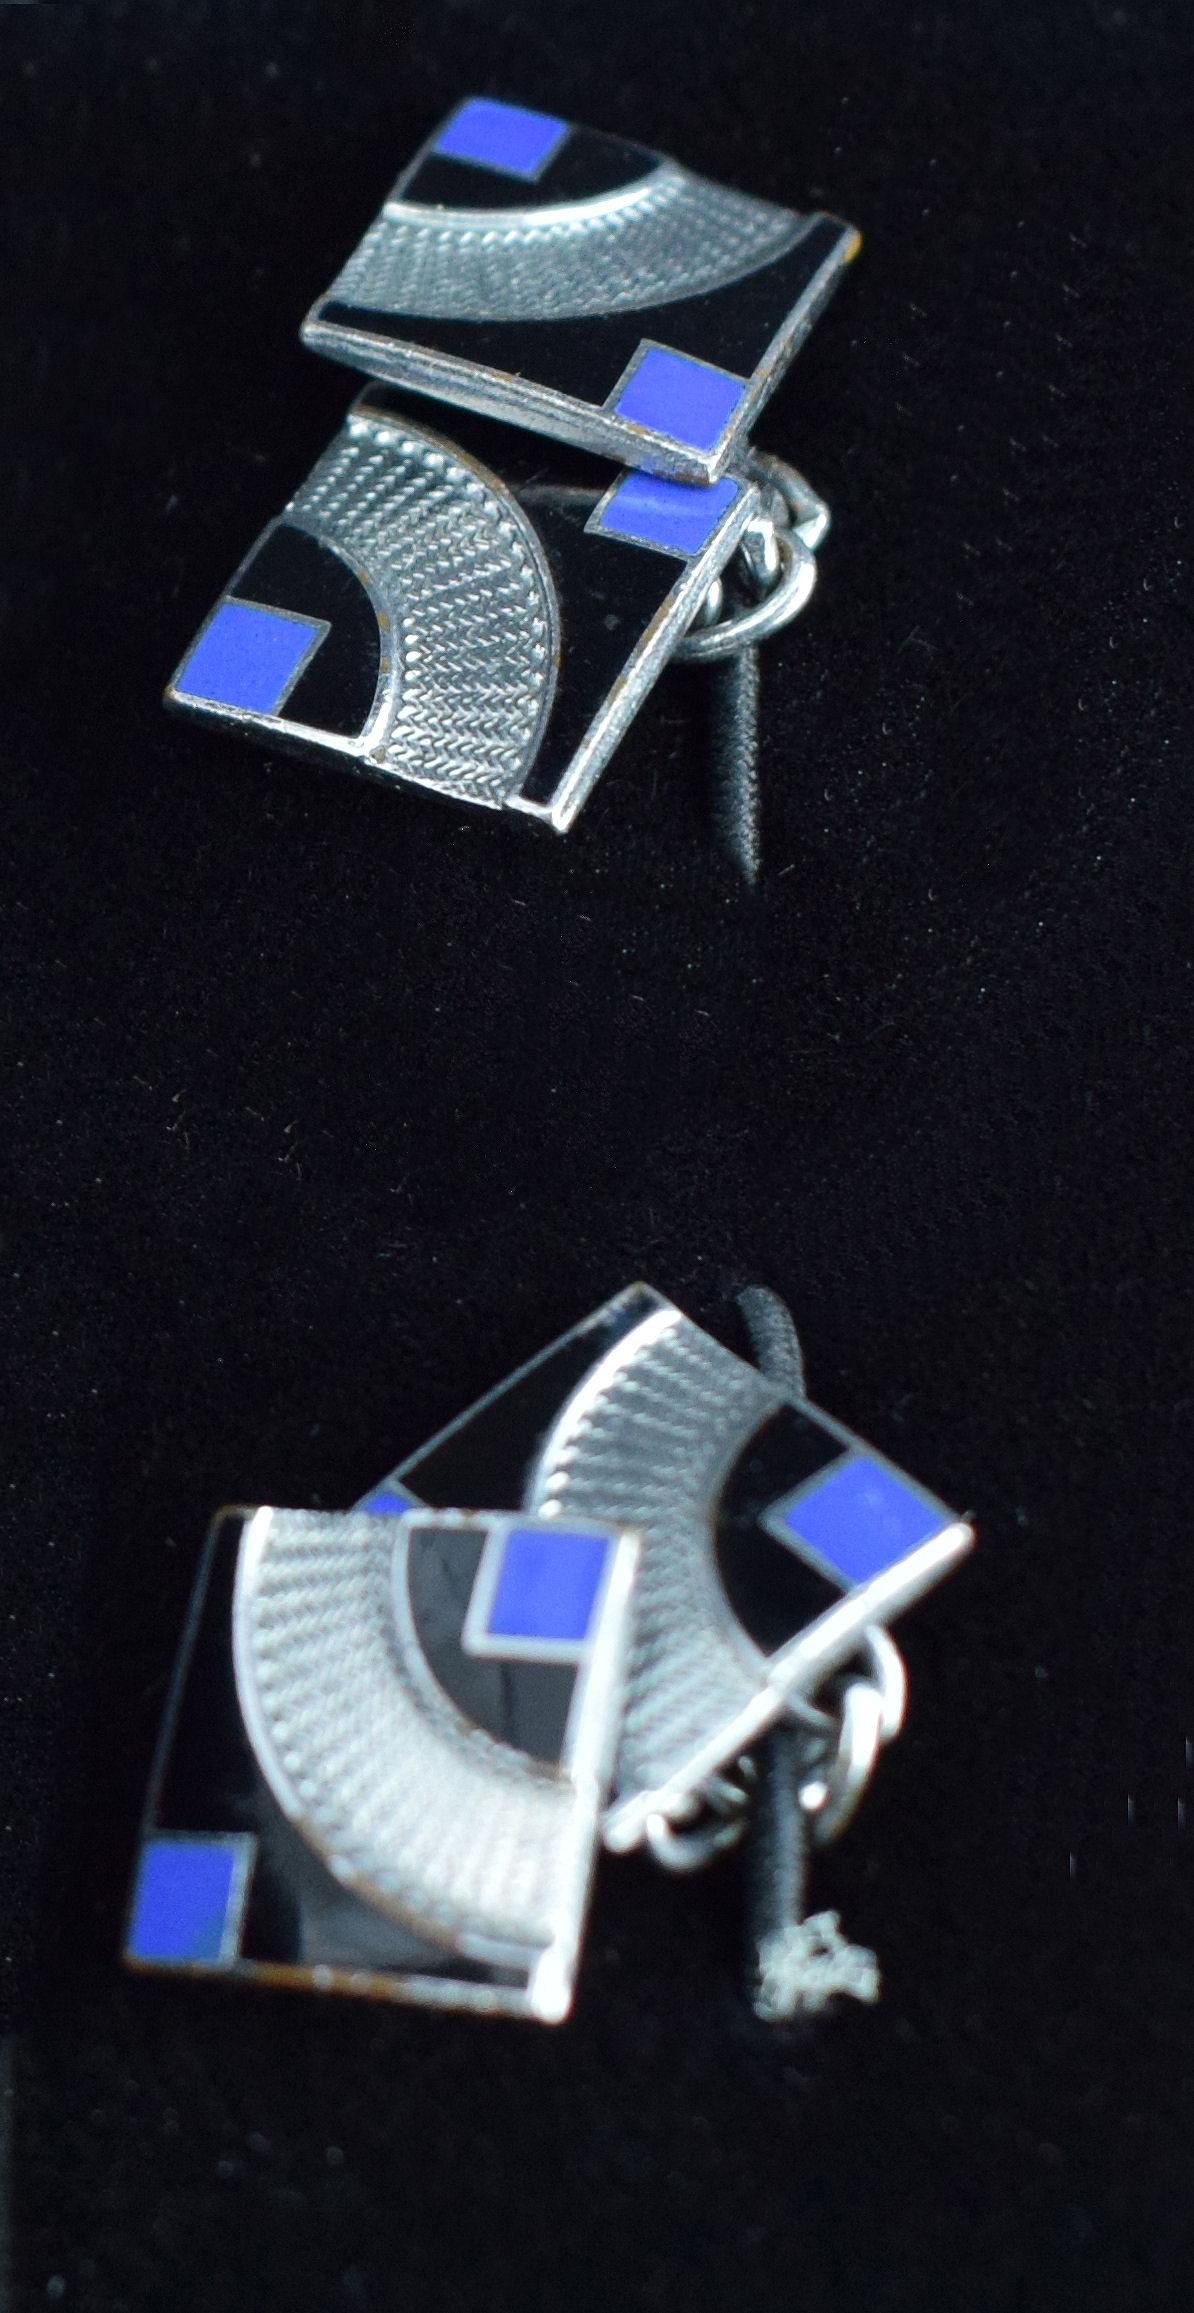 Extremely stylish and quite rare are these matching pair of English 1930's Art Deco modernist enamel gents cufflinks. Fabulous geometric patterning and colour. Vivid blue, silver and jet black enamelling make the perfect and striking combination.